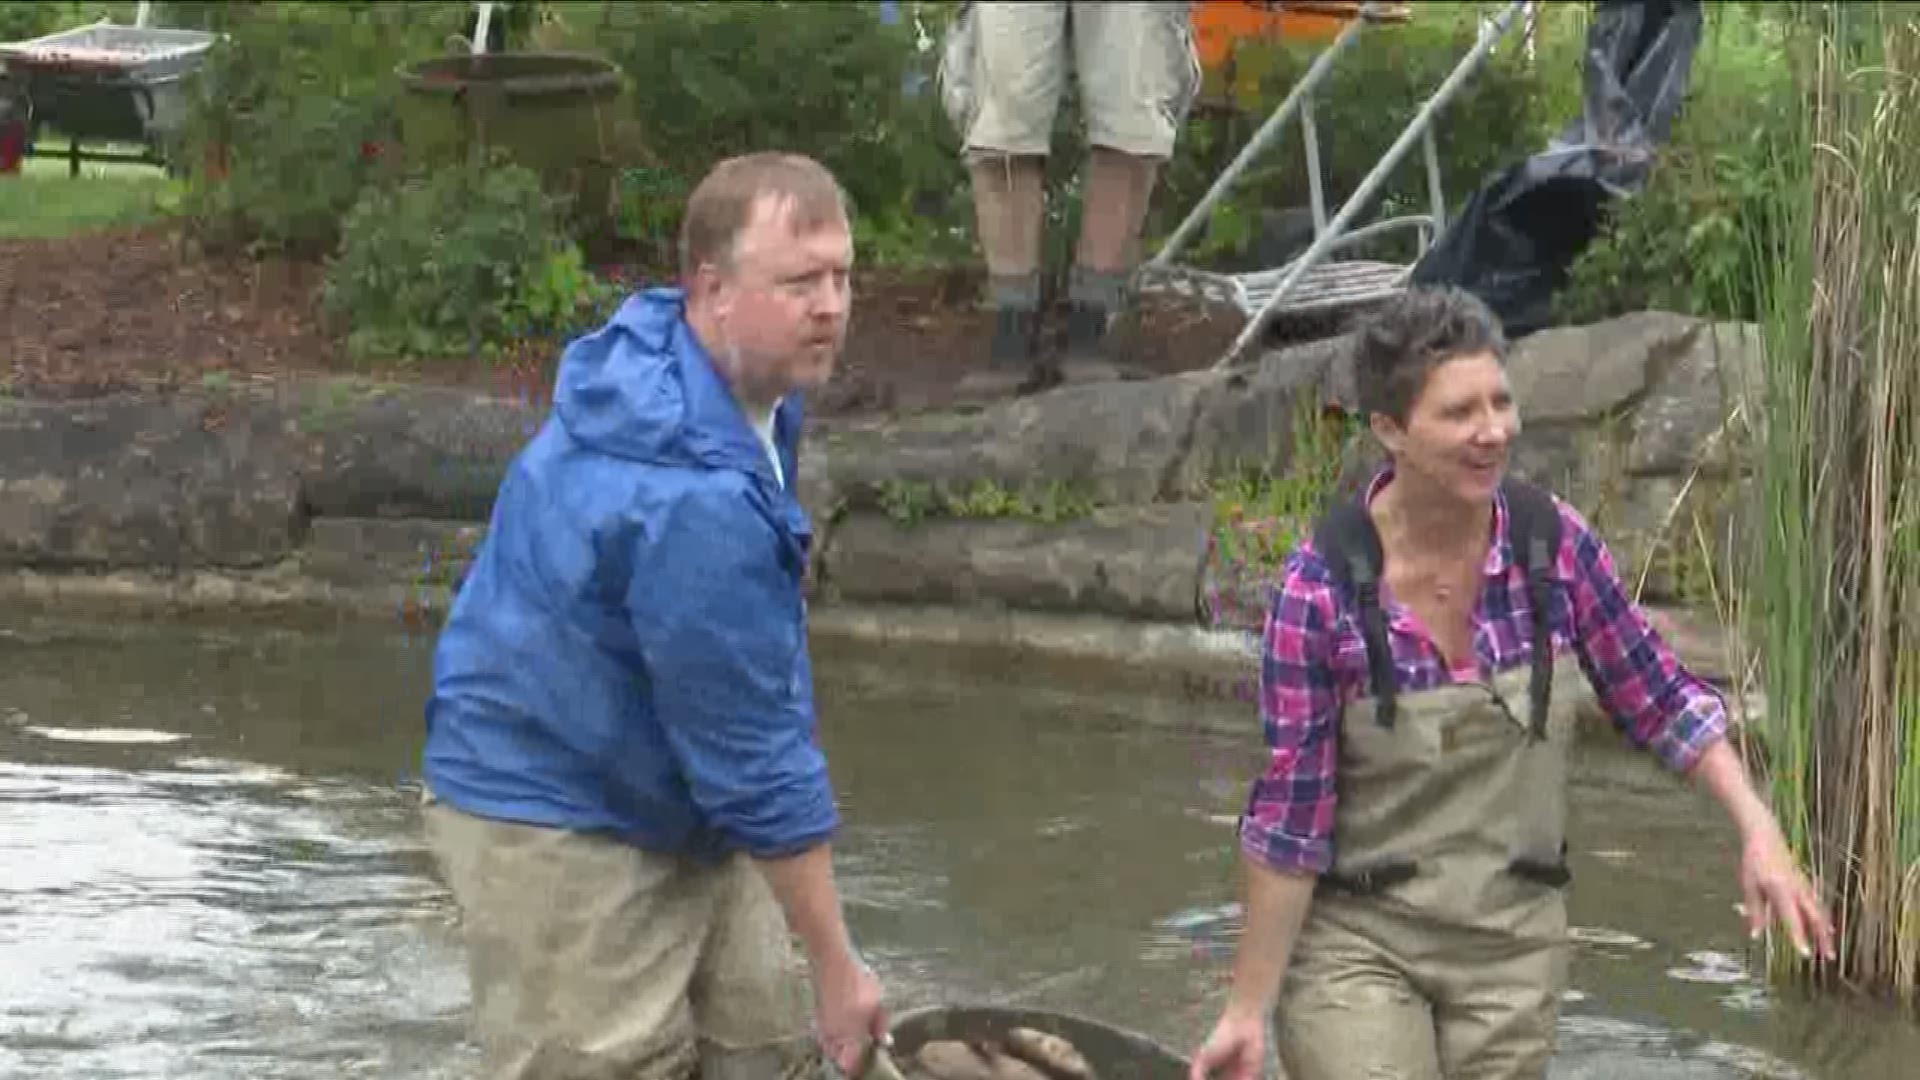 Volunteers spent Sunday cleaning the popular koi pond at the Boise Depot.